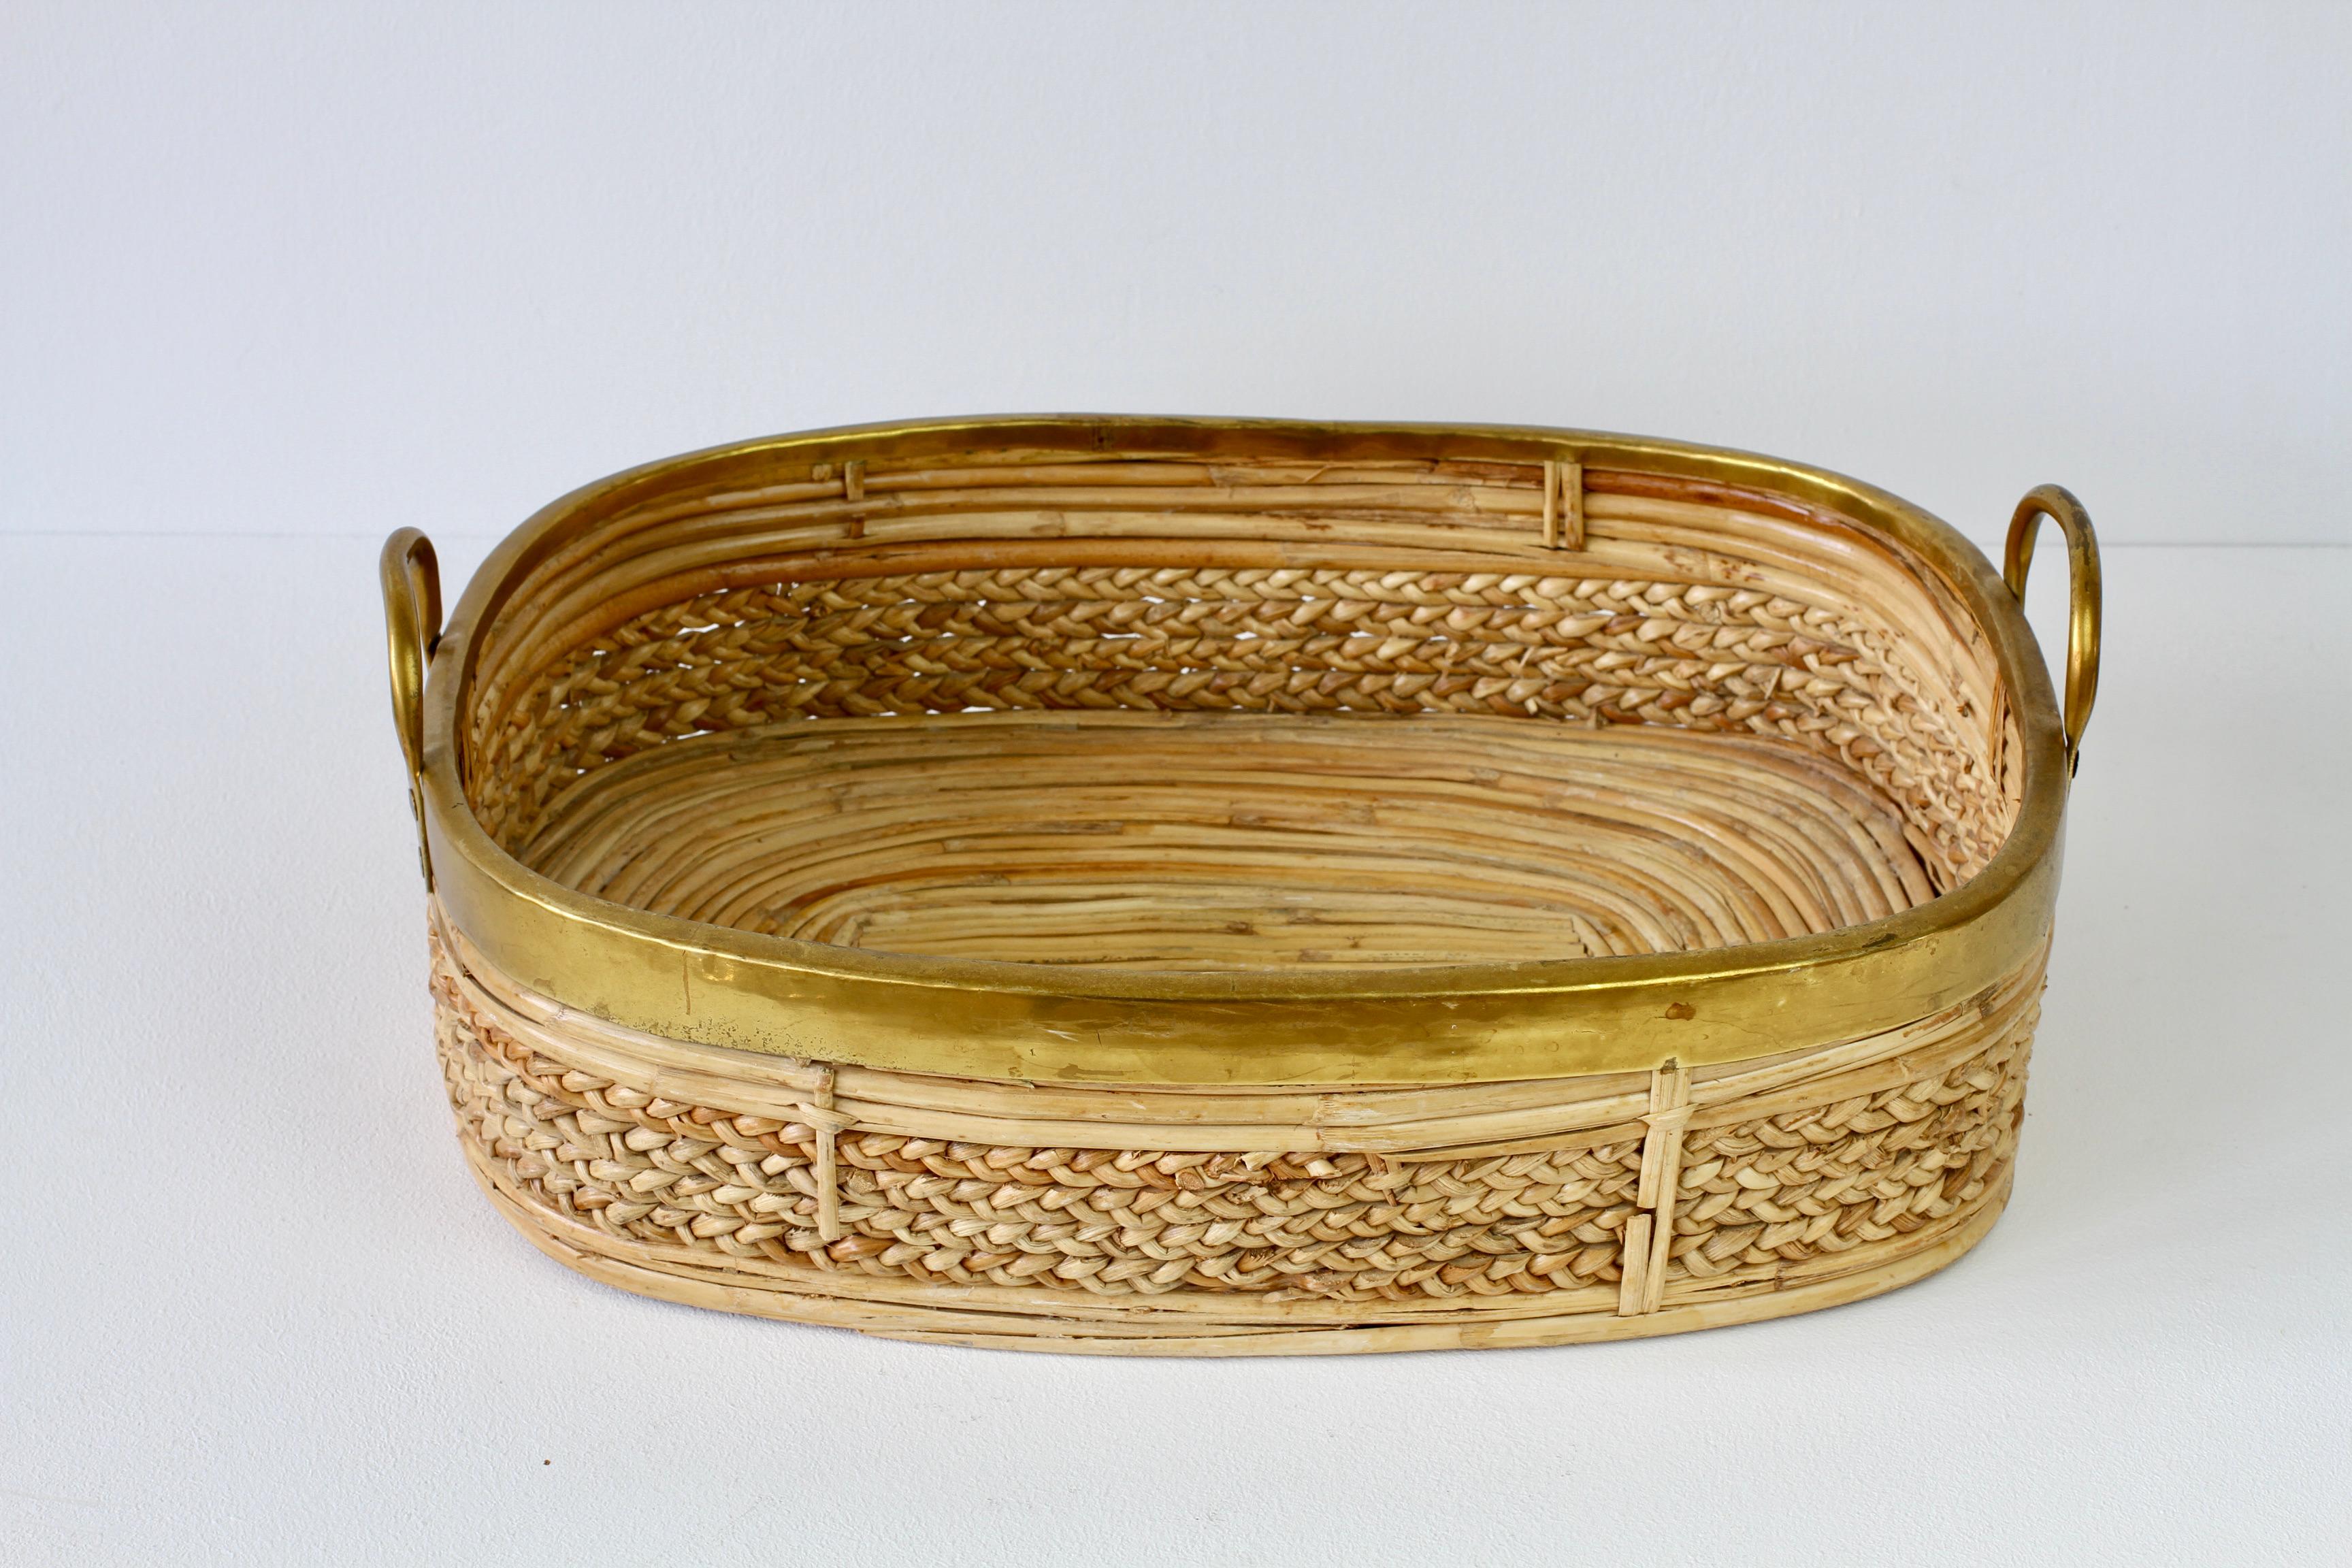 Large midcentury Hollywood Regency drinks tray, Stand, holder or serving platter made in Italy, circa 1970s. Made of bamboo and weaved / woven rattan with a polished brass rim detail and. carrying handles, which finishes the piece perfectly. A must